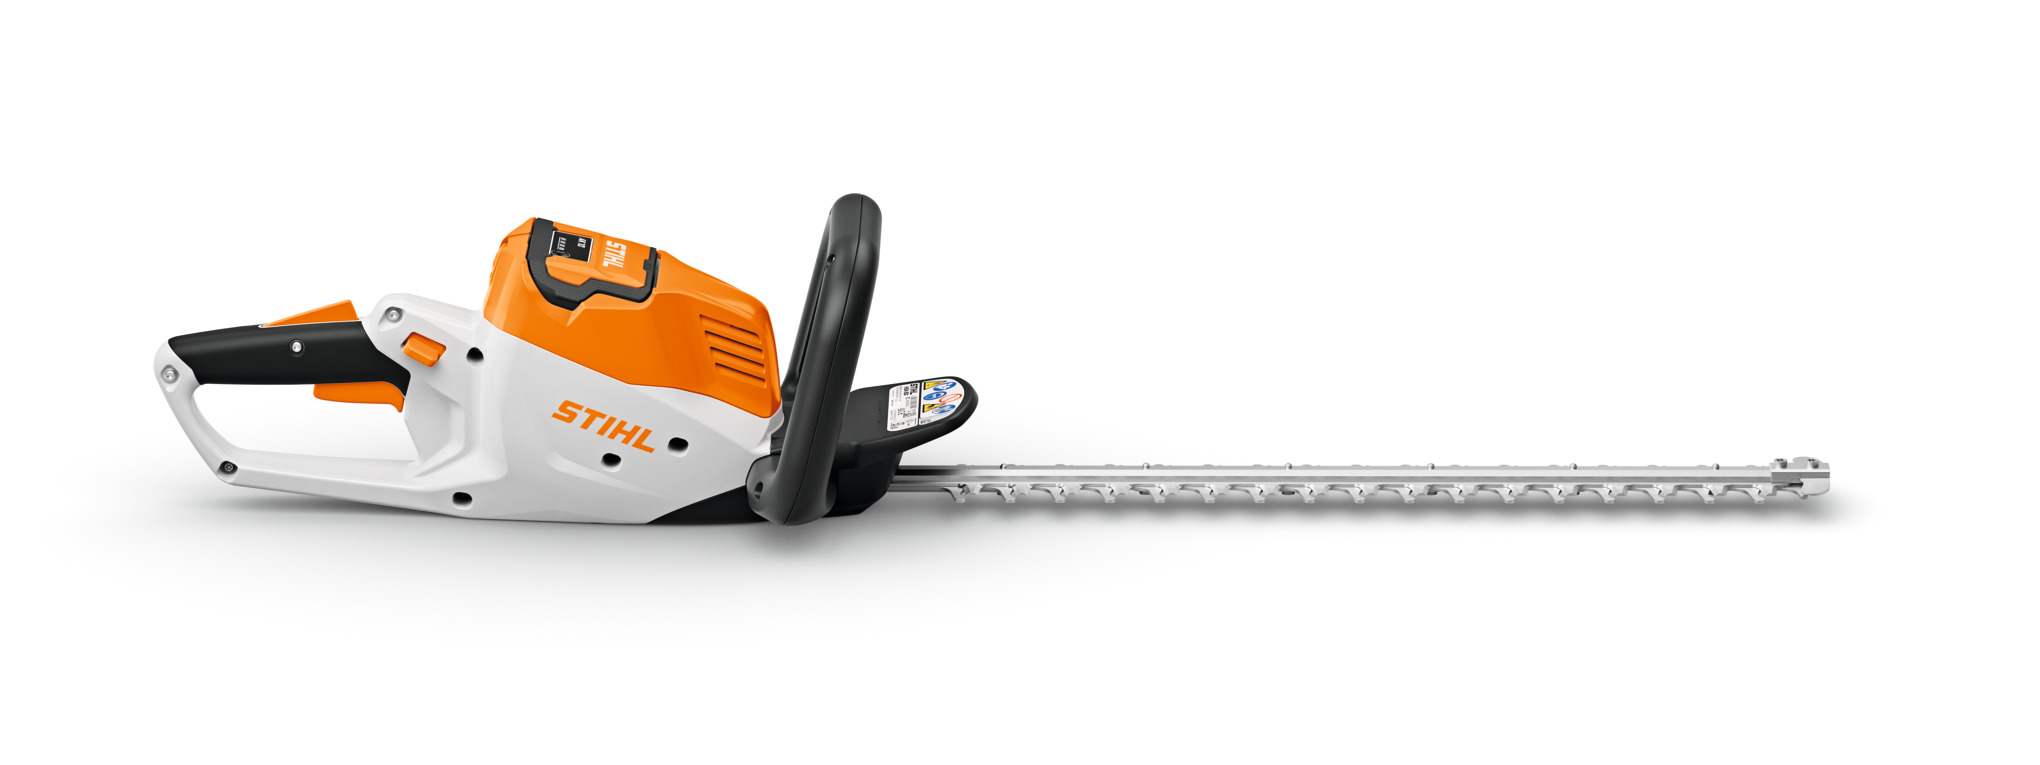 HSA 50 Hedge Trimmer